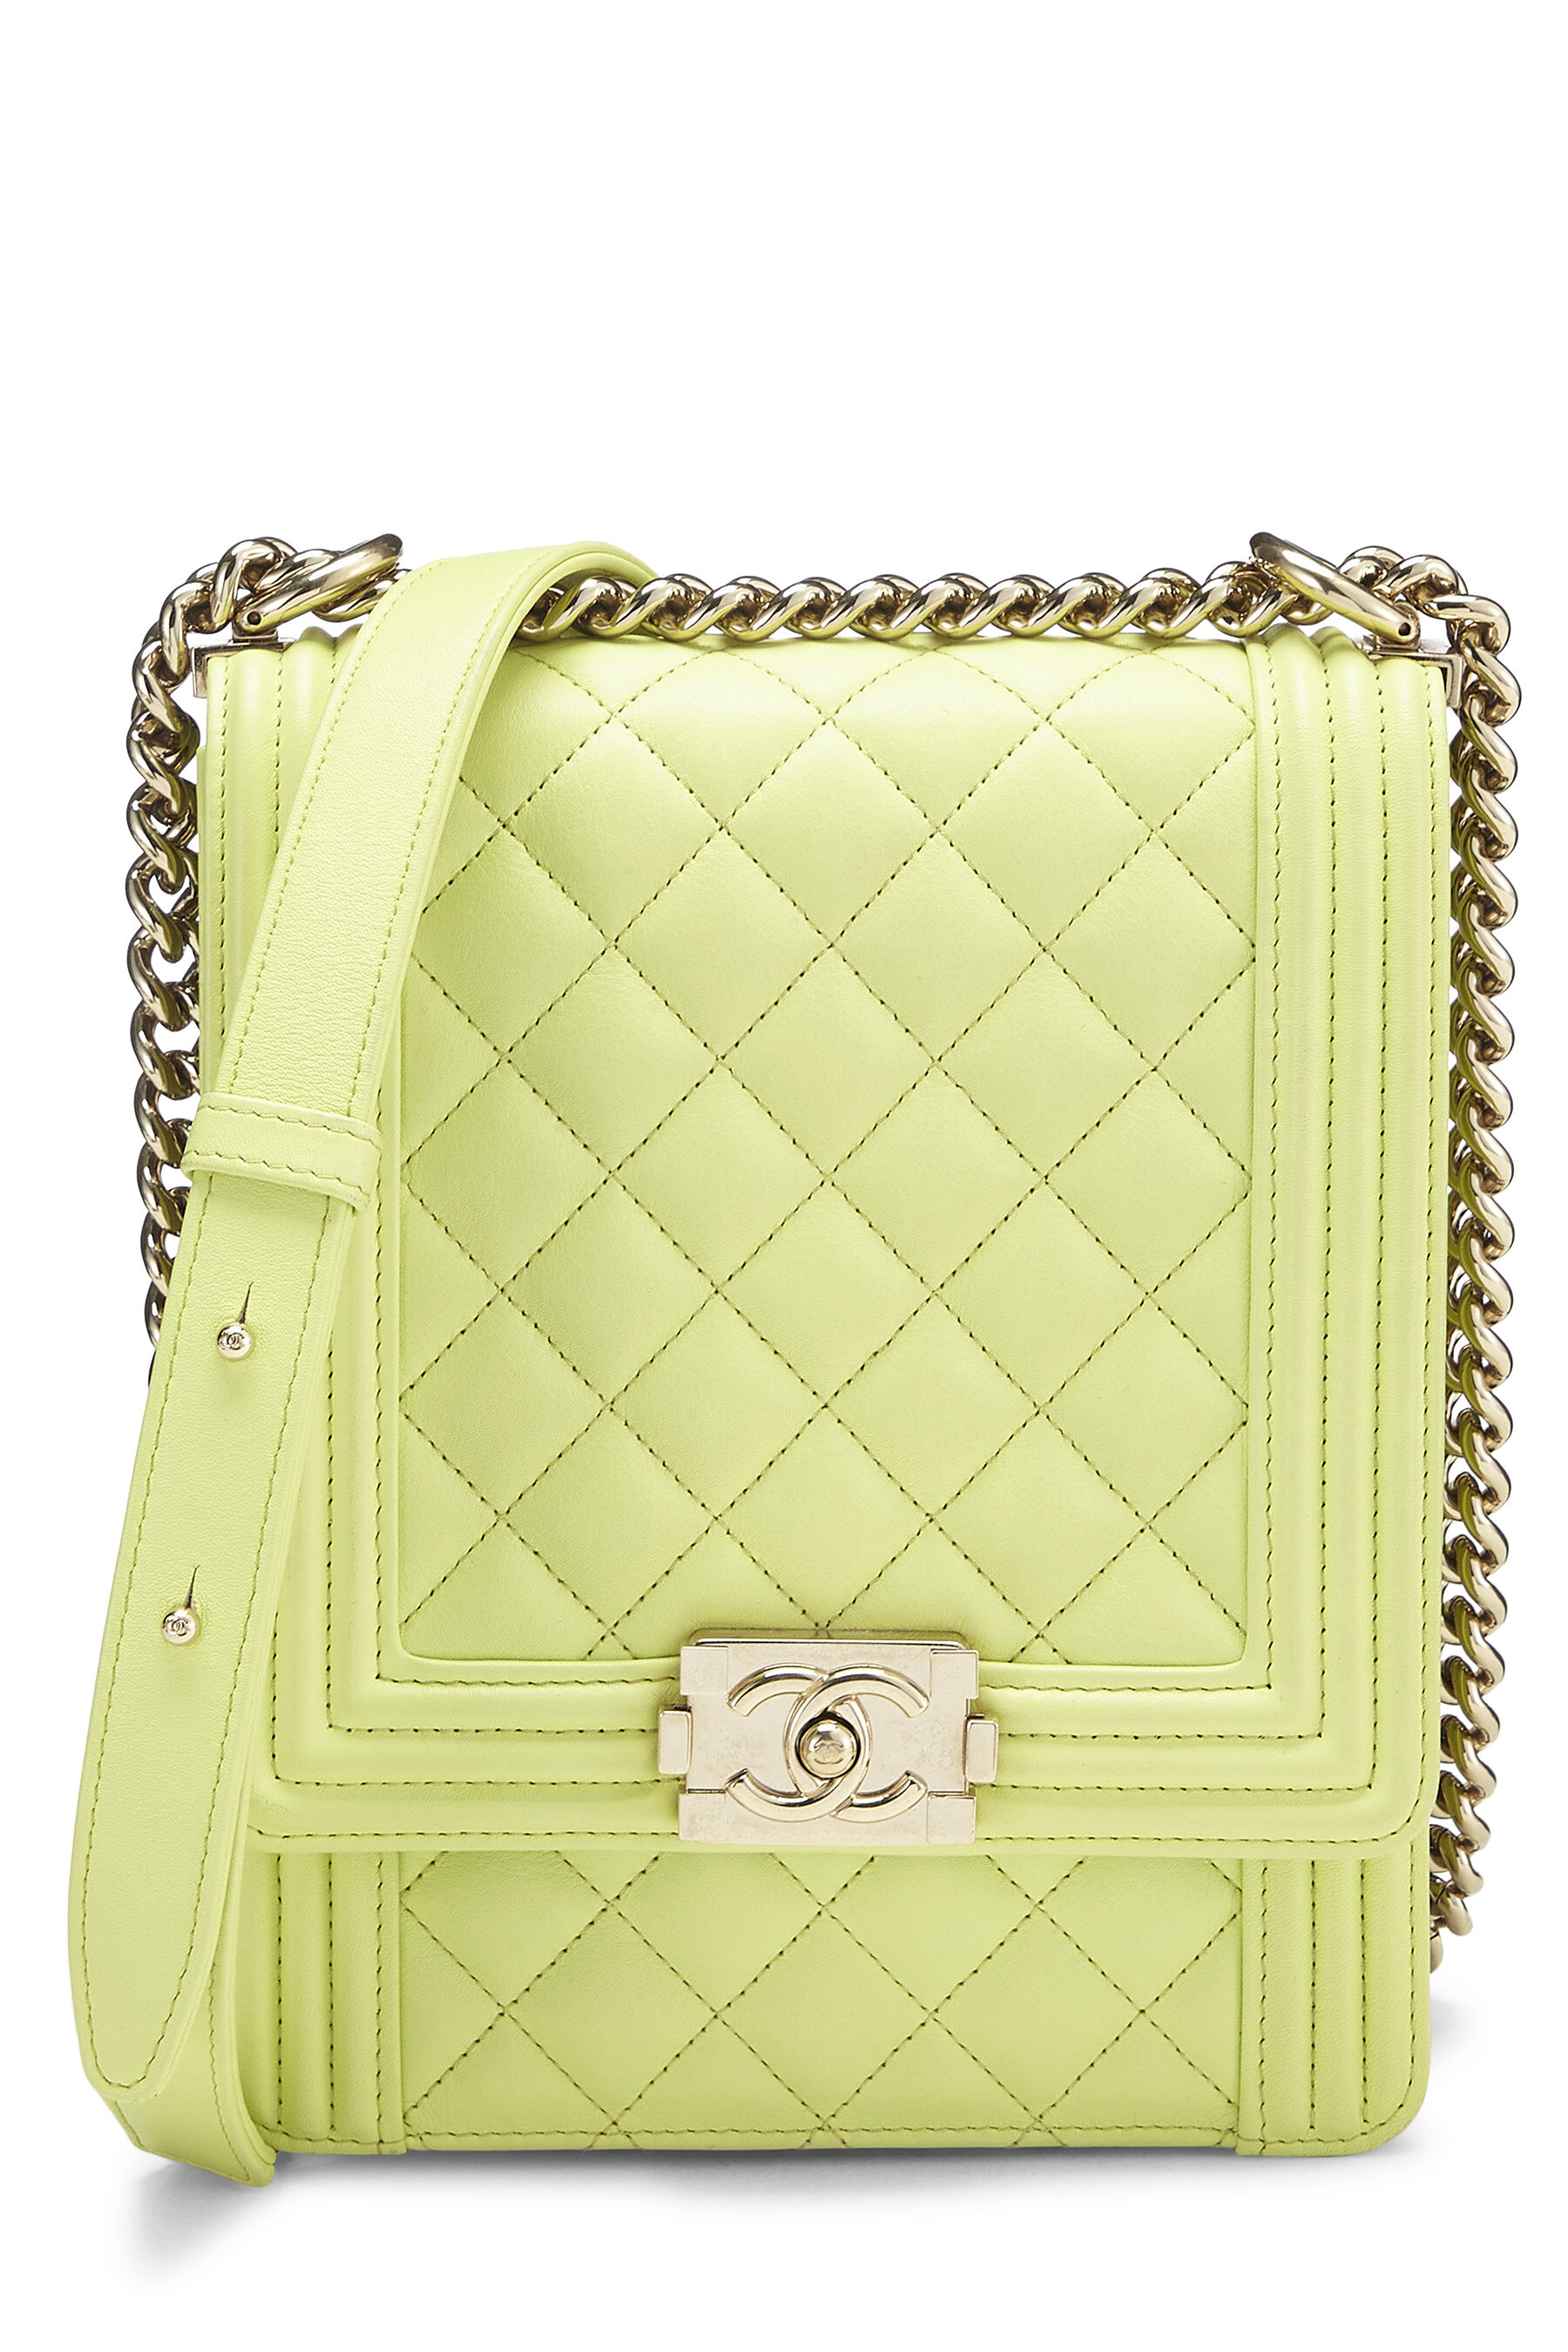 North south boy leather crossbody bag Chanel Yellow in Leather